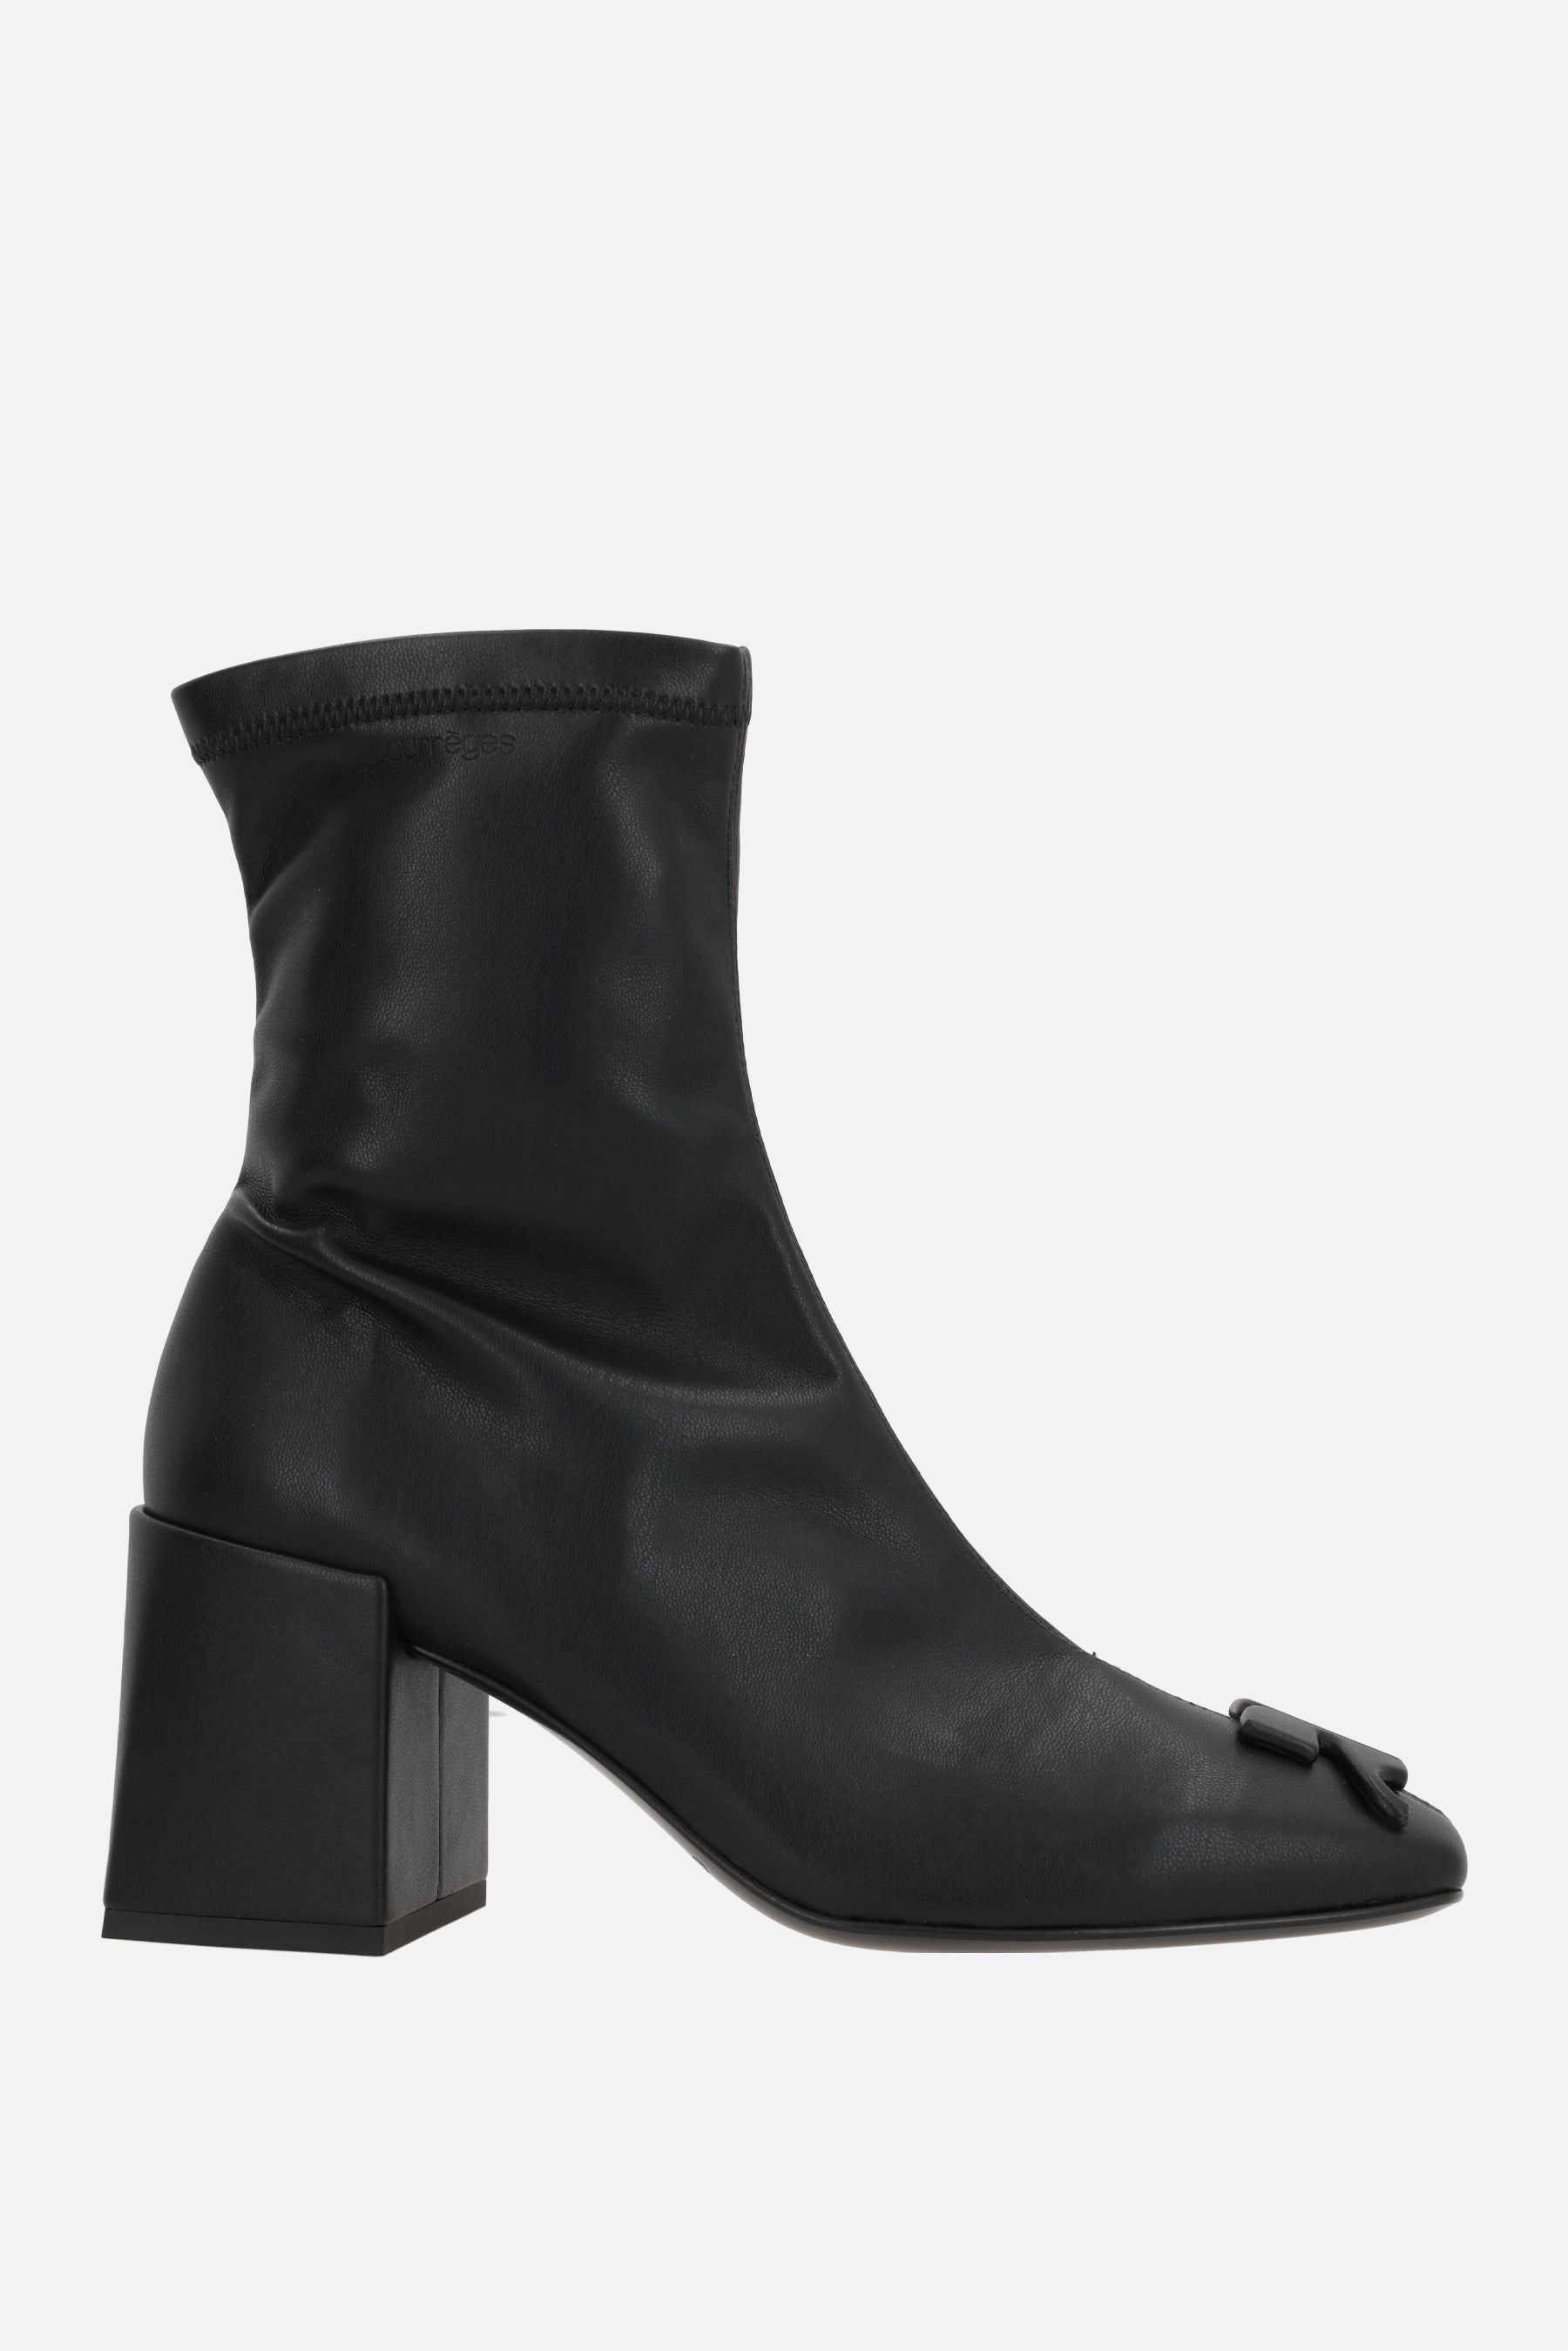 Reedition Heritage vegan nappa ankle boots